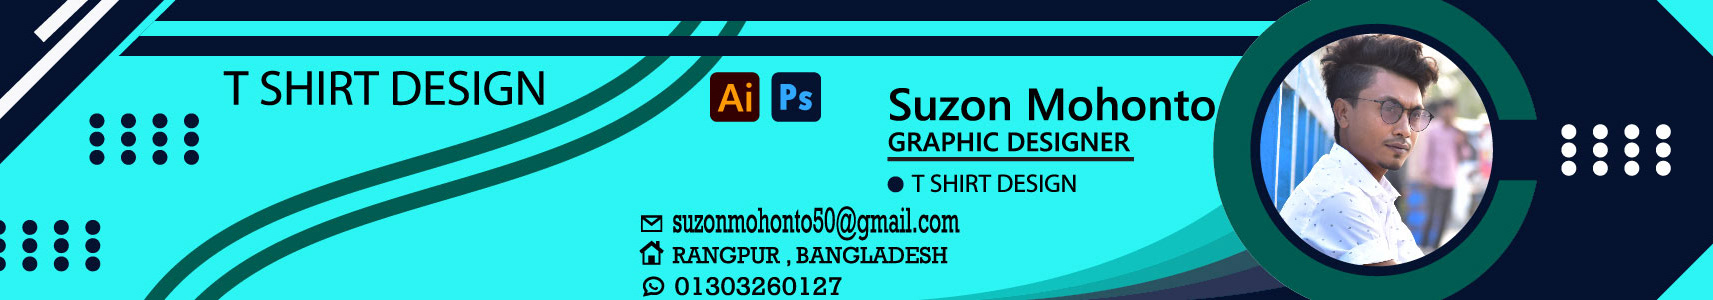 Suzon Mohonto's profile banner